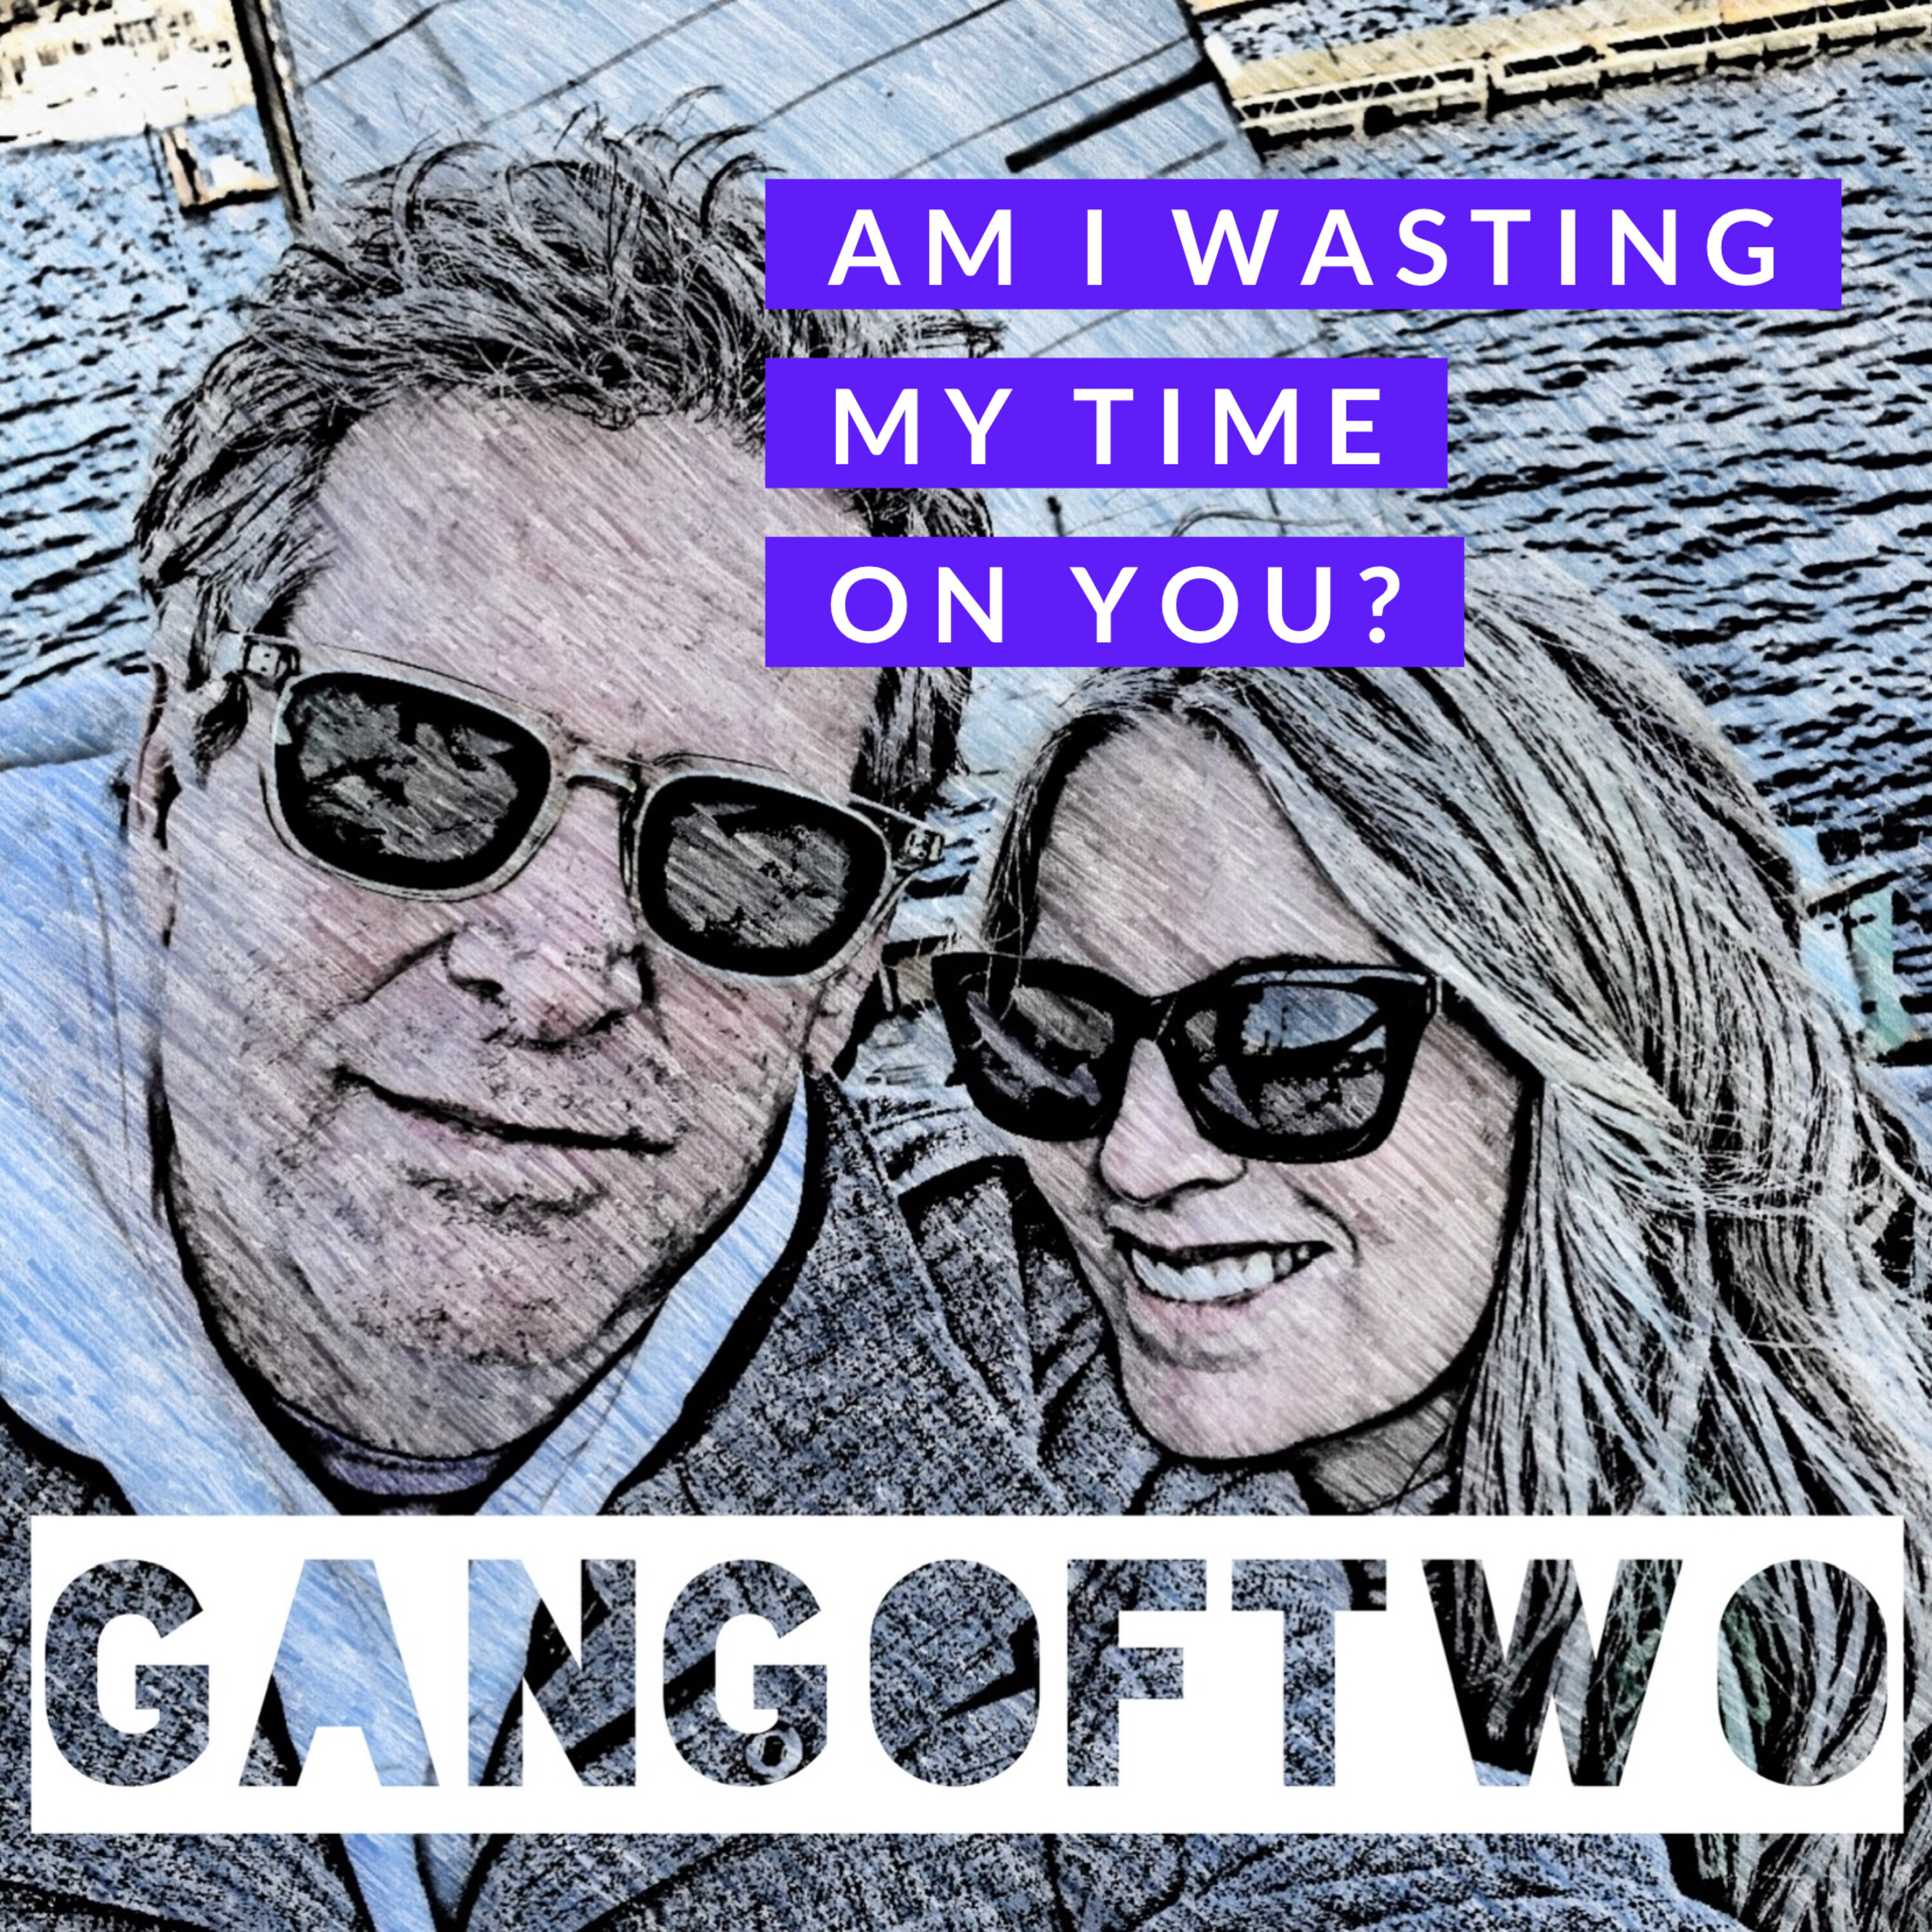 AM I WASTING MY TIME ON YOU? Image